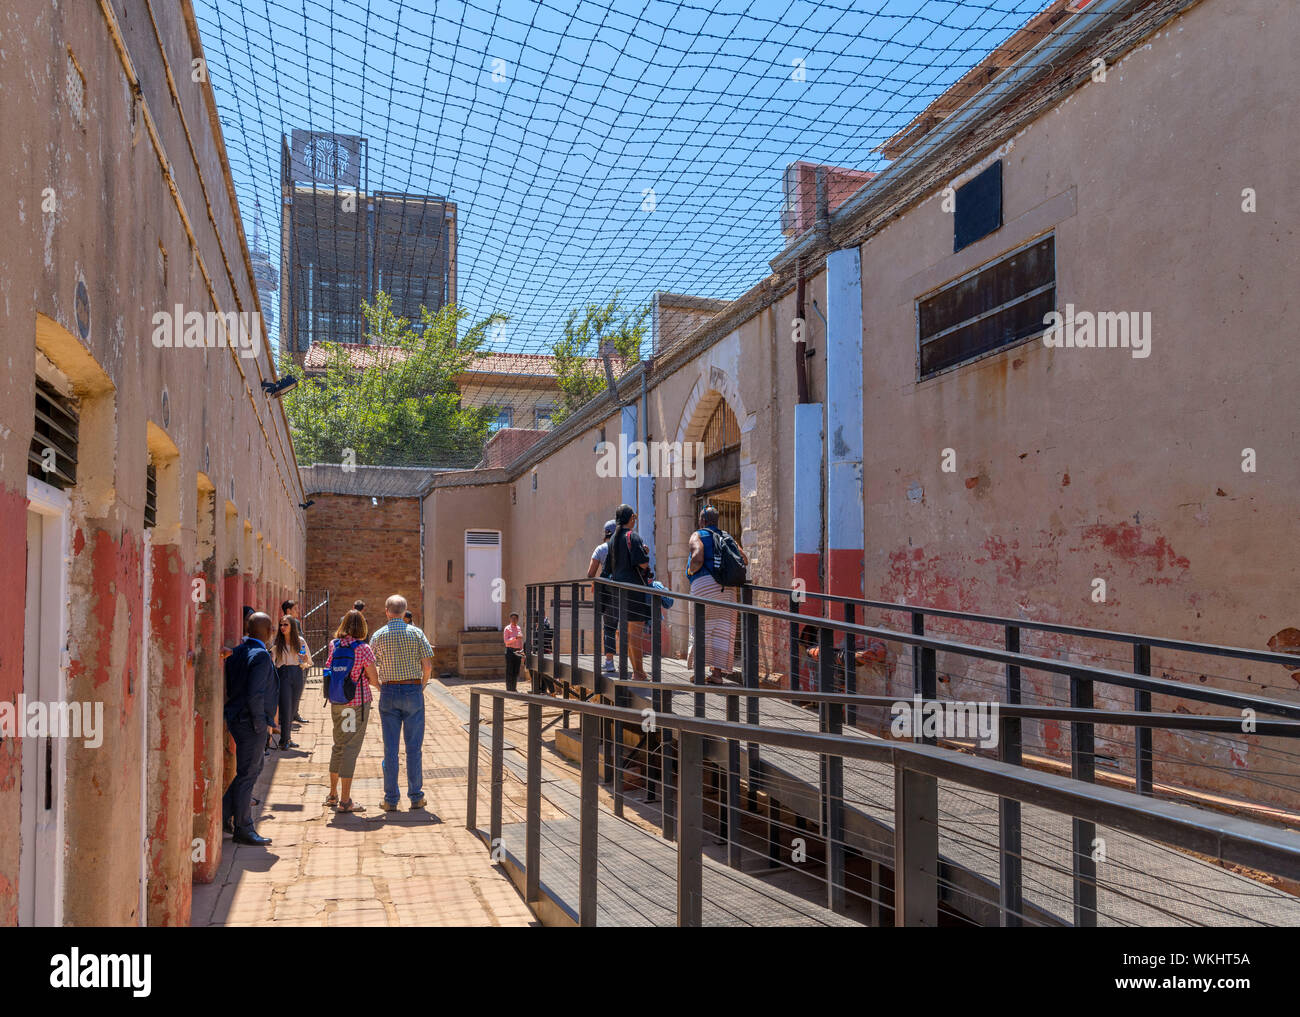 Group of visitors looking at the isolation cells in Number Four Jail, Constitution Hill, Johannesburg, South Africa Stock Photo